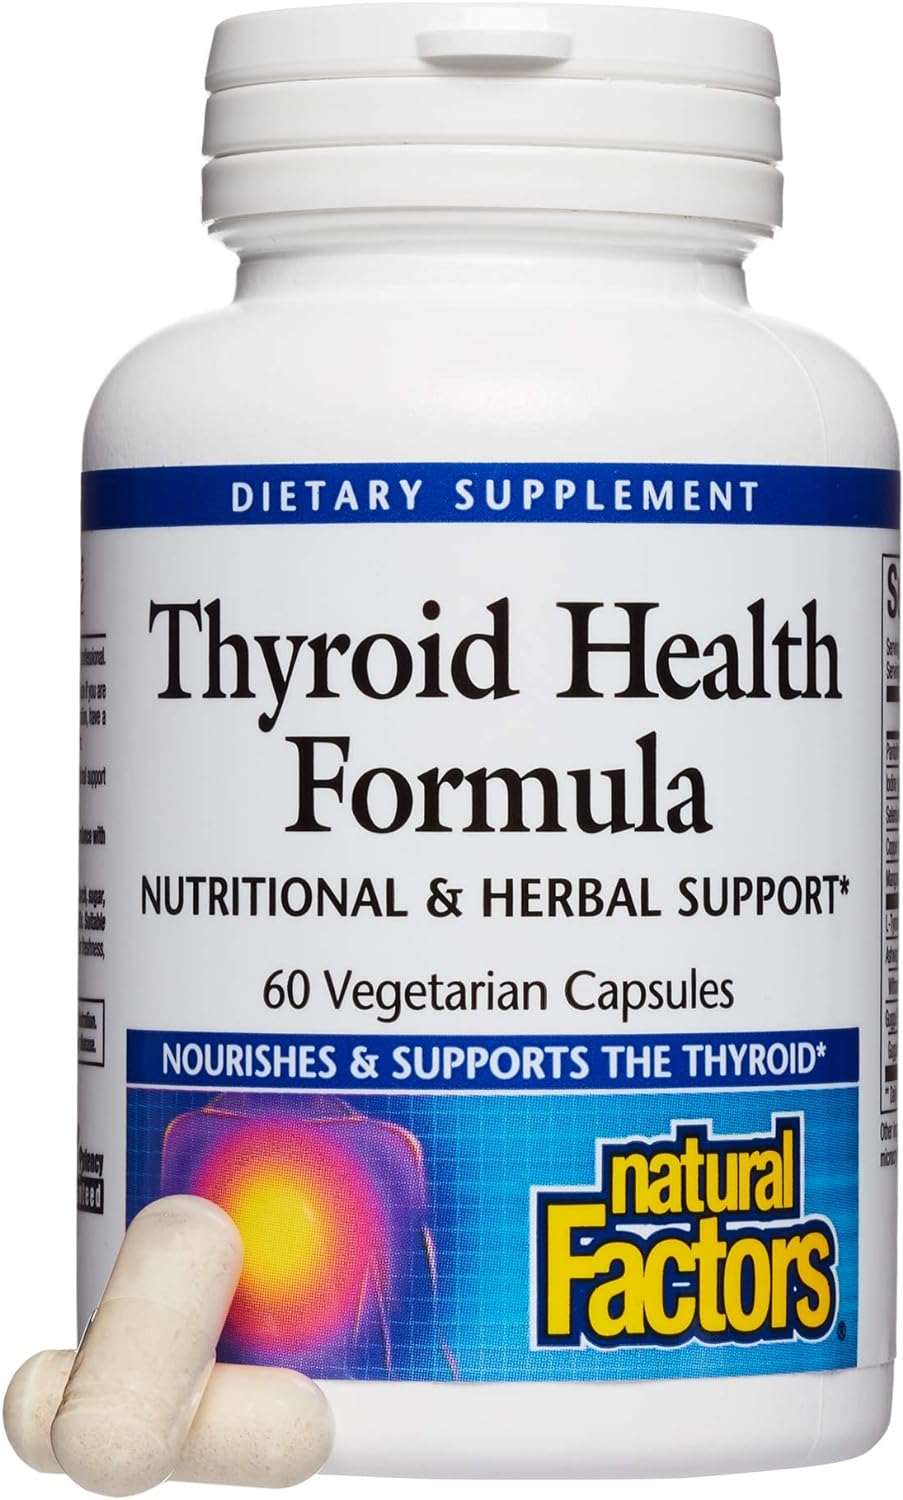 Natural Factors - Thyroid Health Formula, Nutritional Support for The Thyroid Gland, 60 Vegetarian Capsules